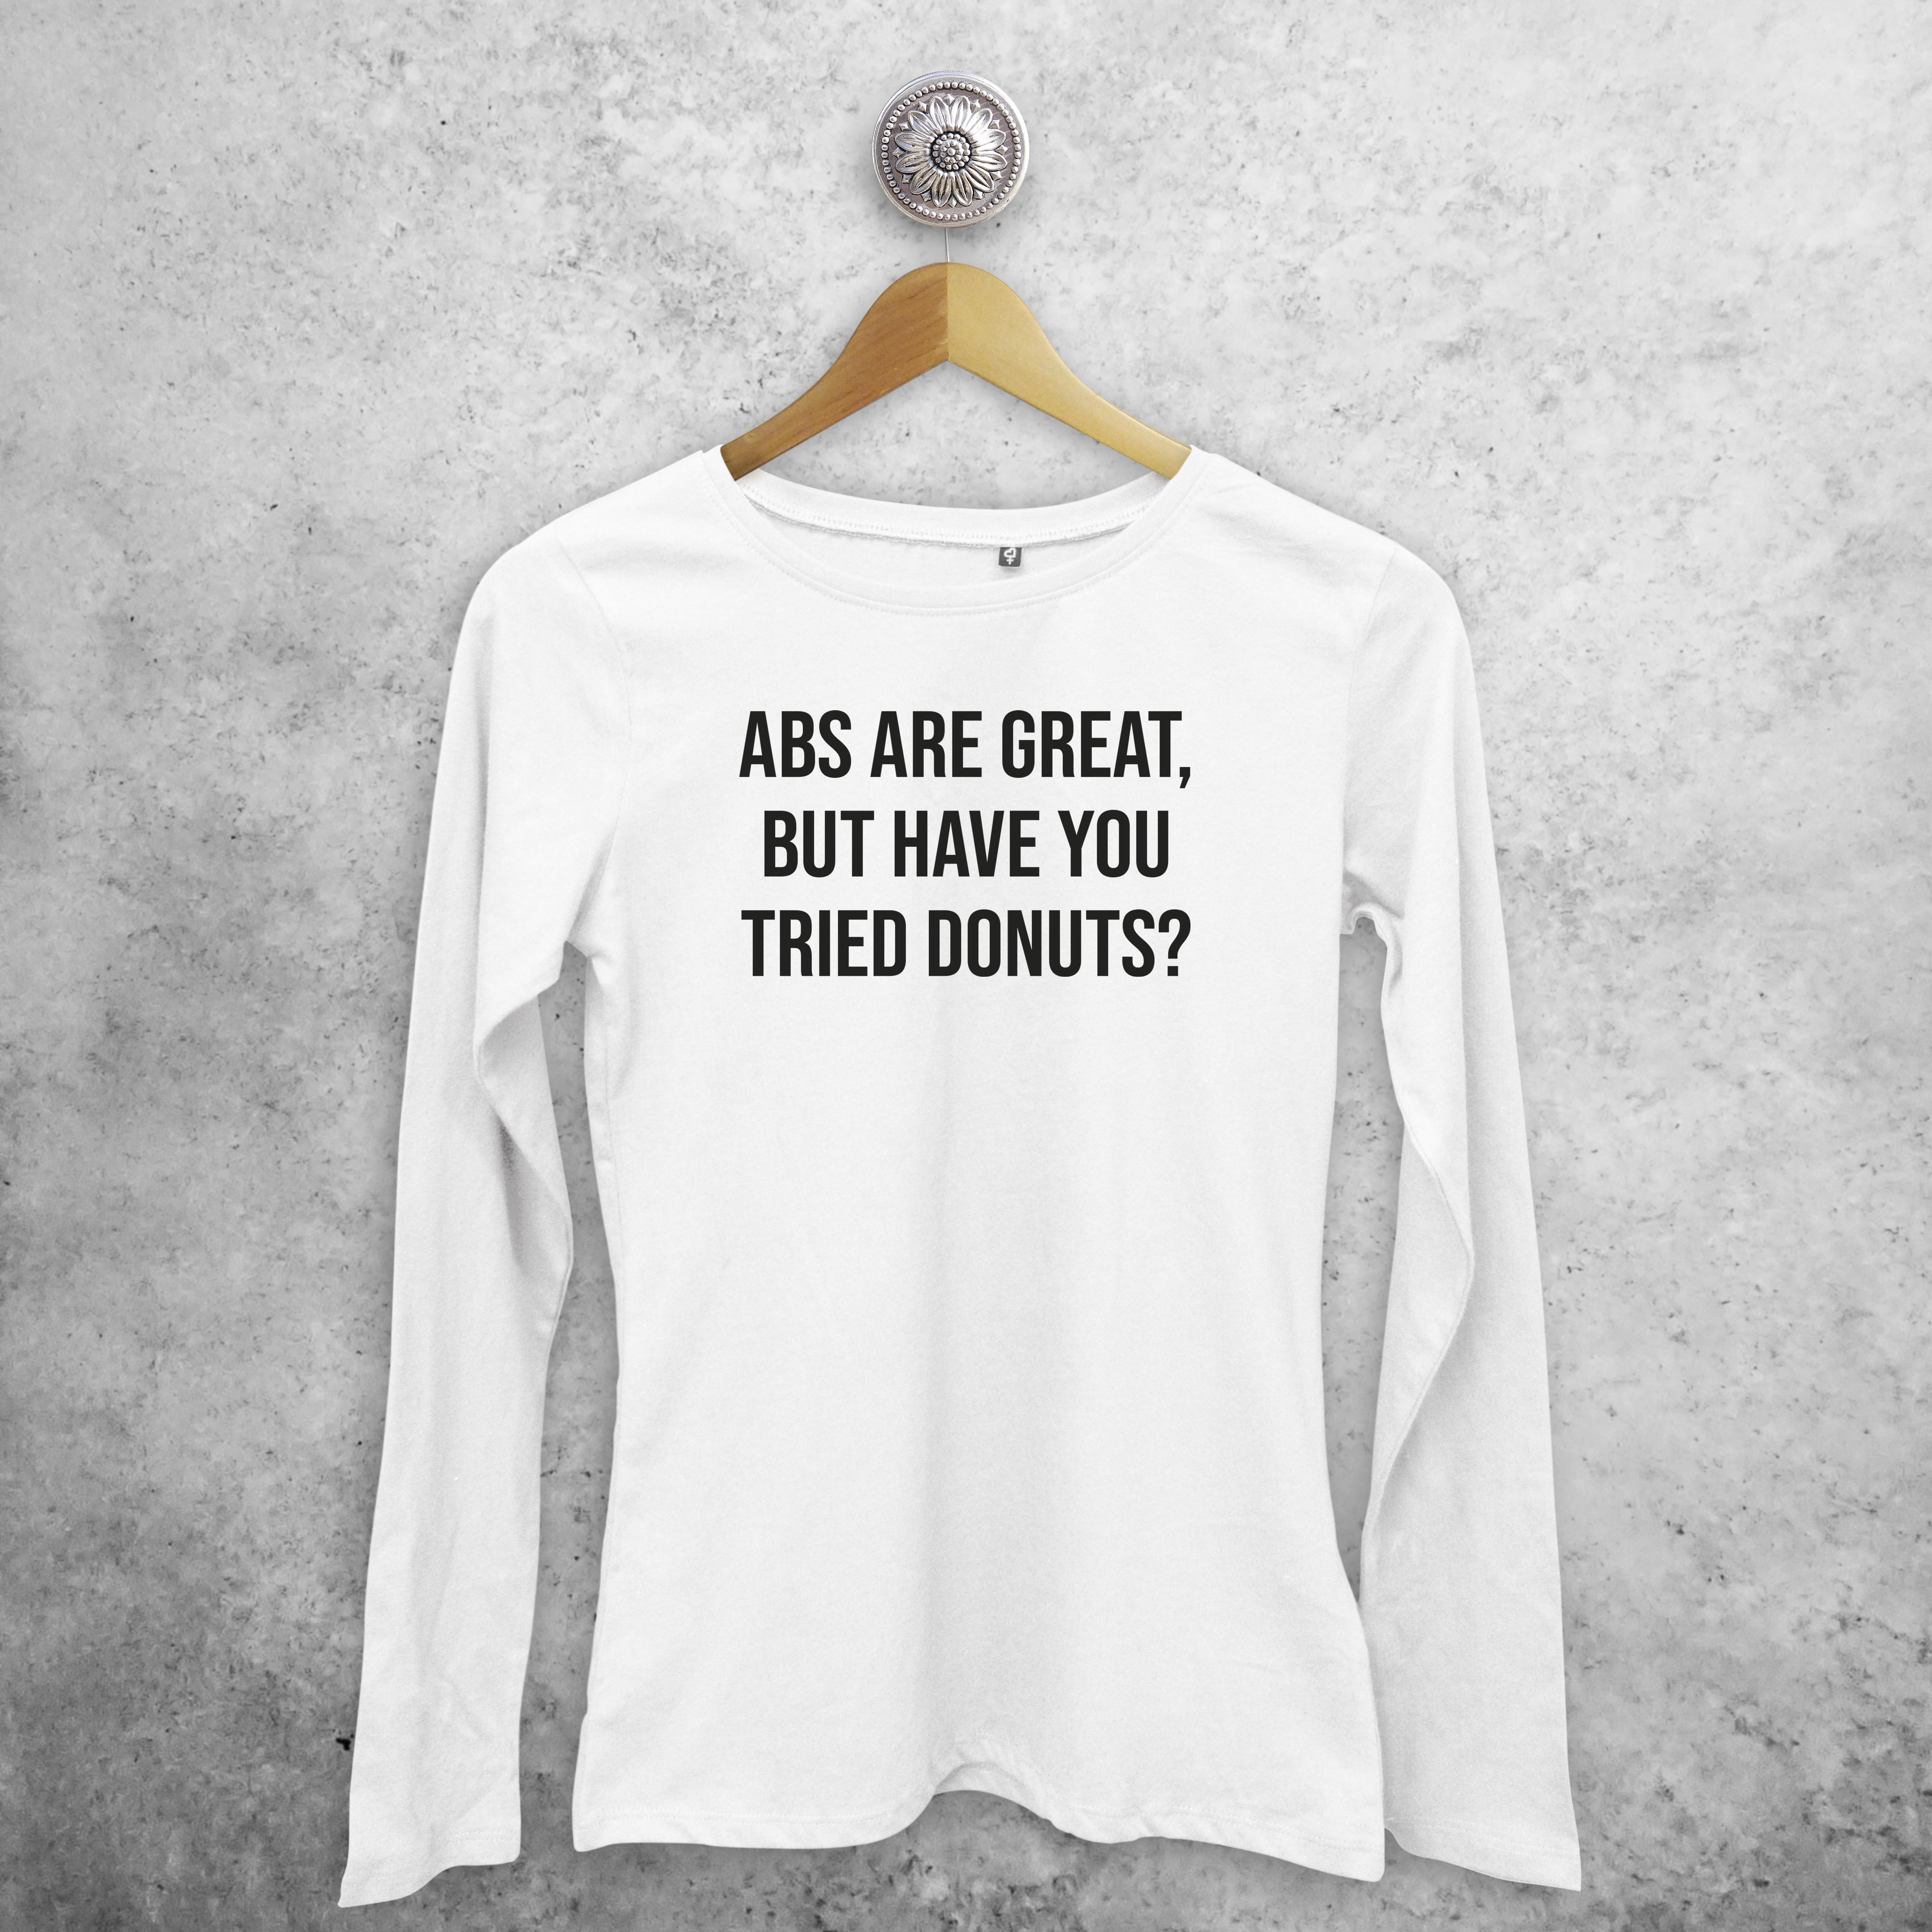 'Abs are great, but have you tried donuts?' volwassene shirt met lange mouwen